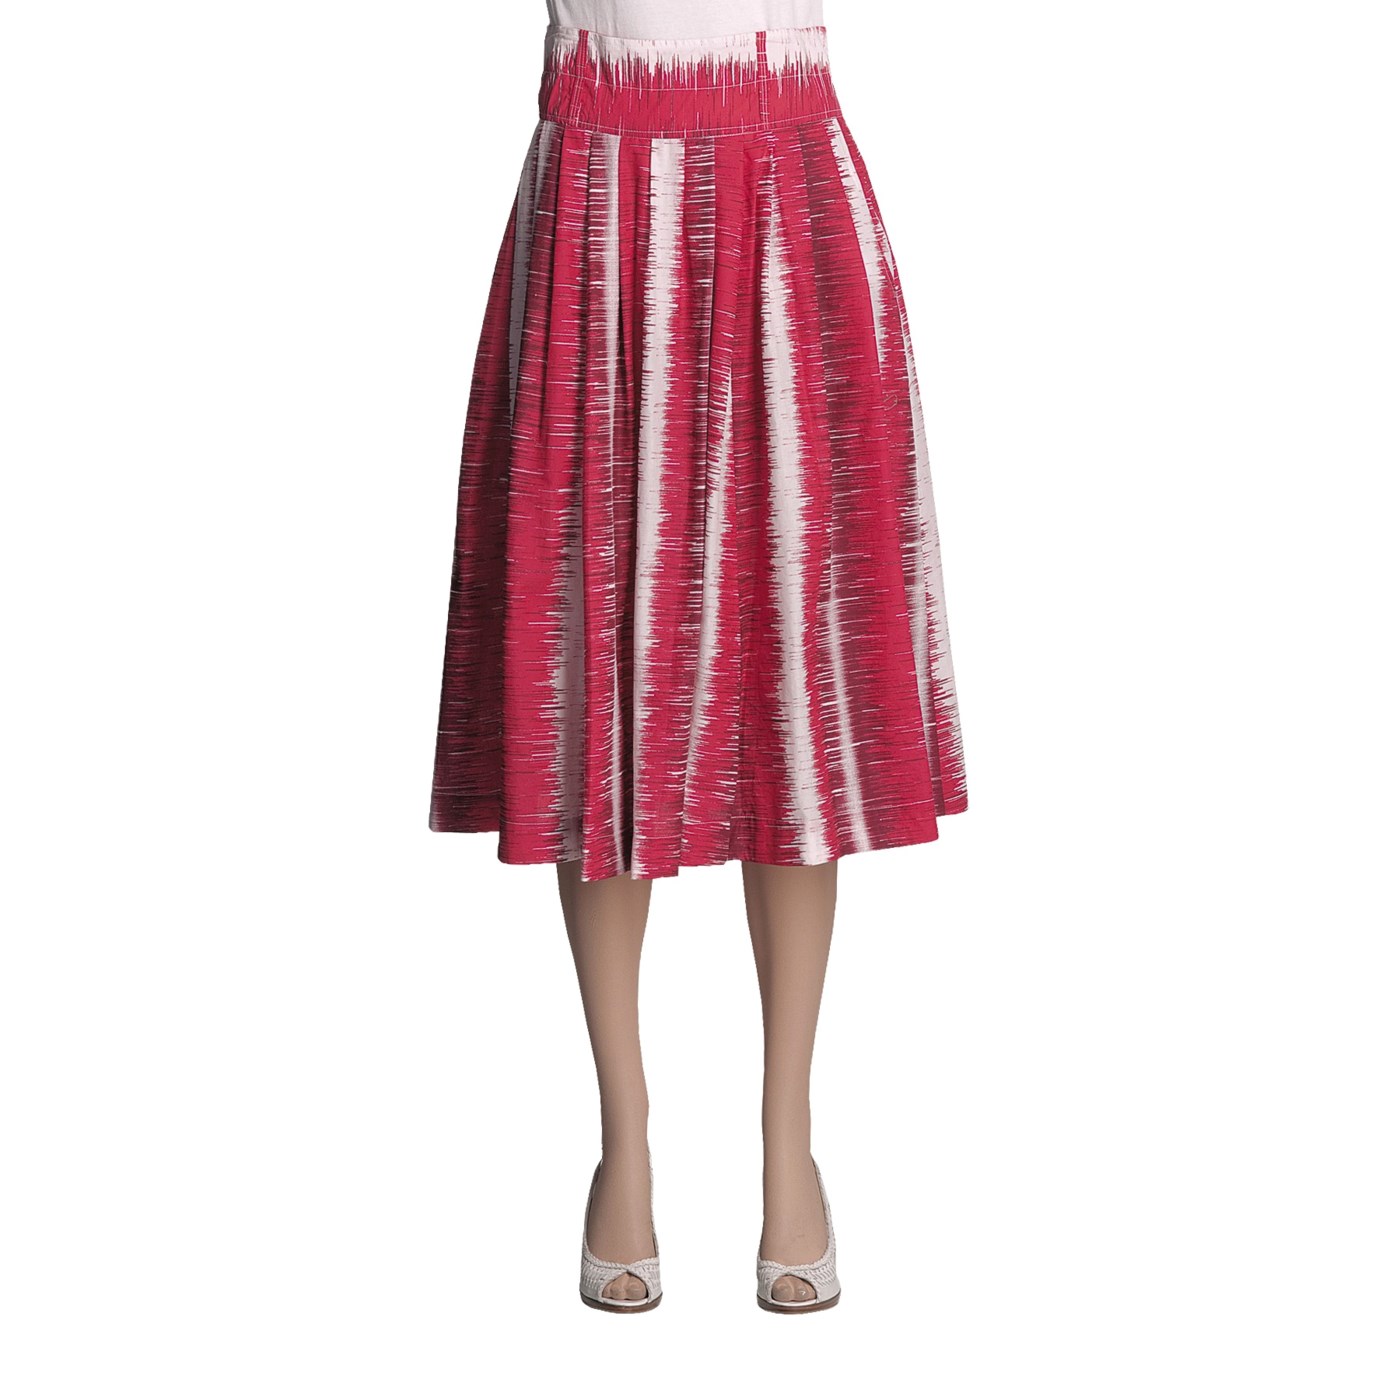 Sharagano Pleated Cotton Skirt (For Women) in Red   Closeouts